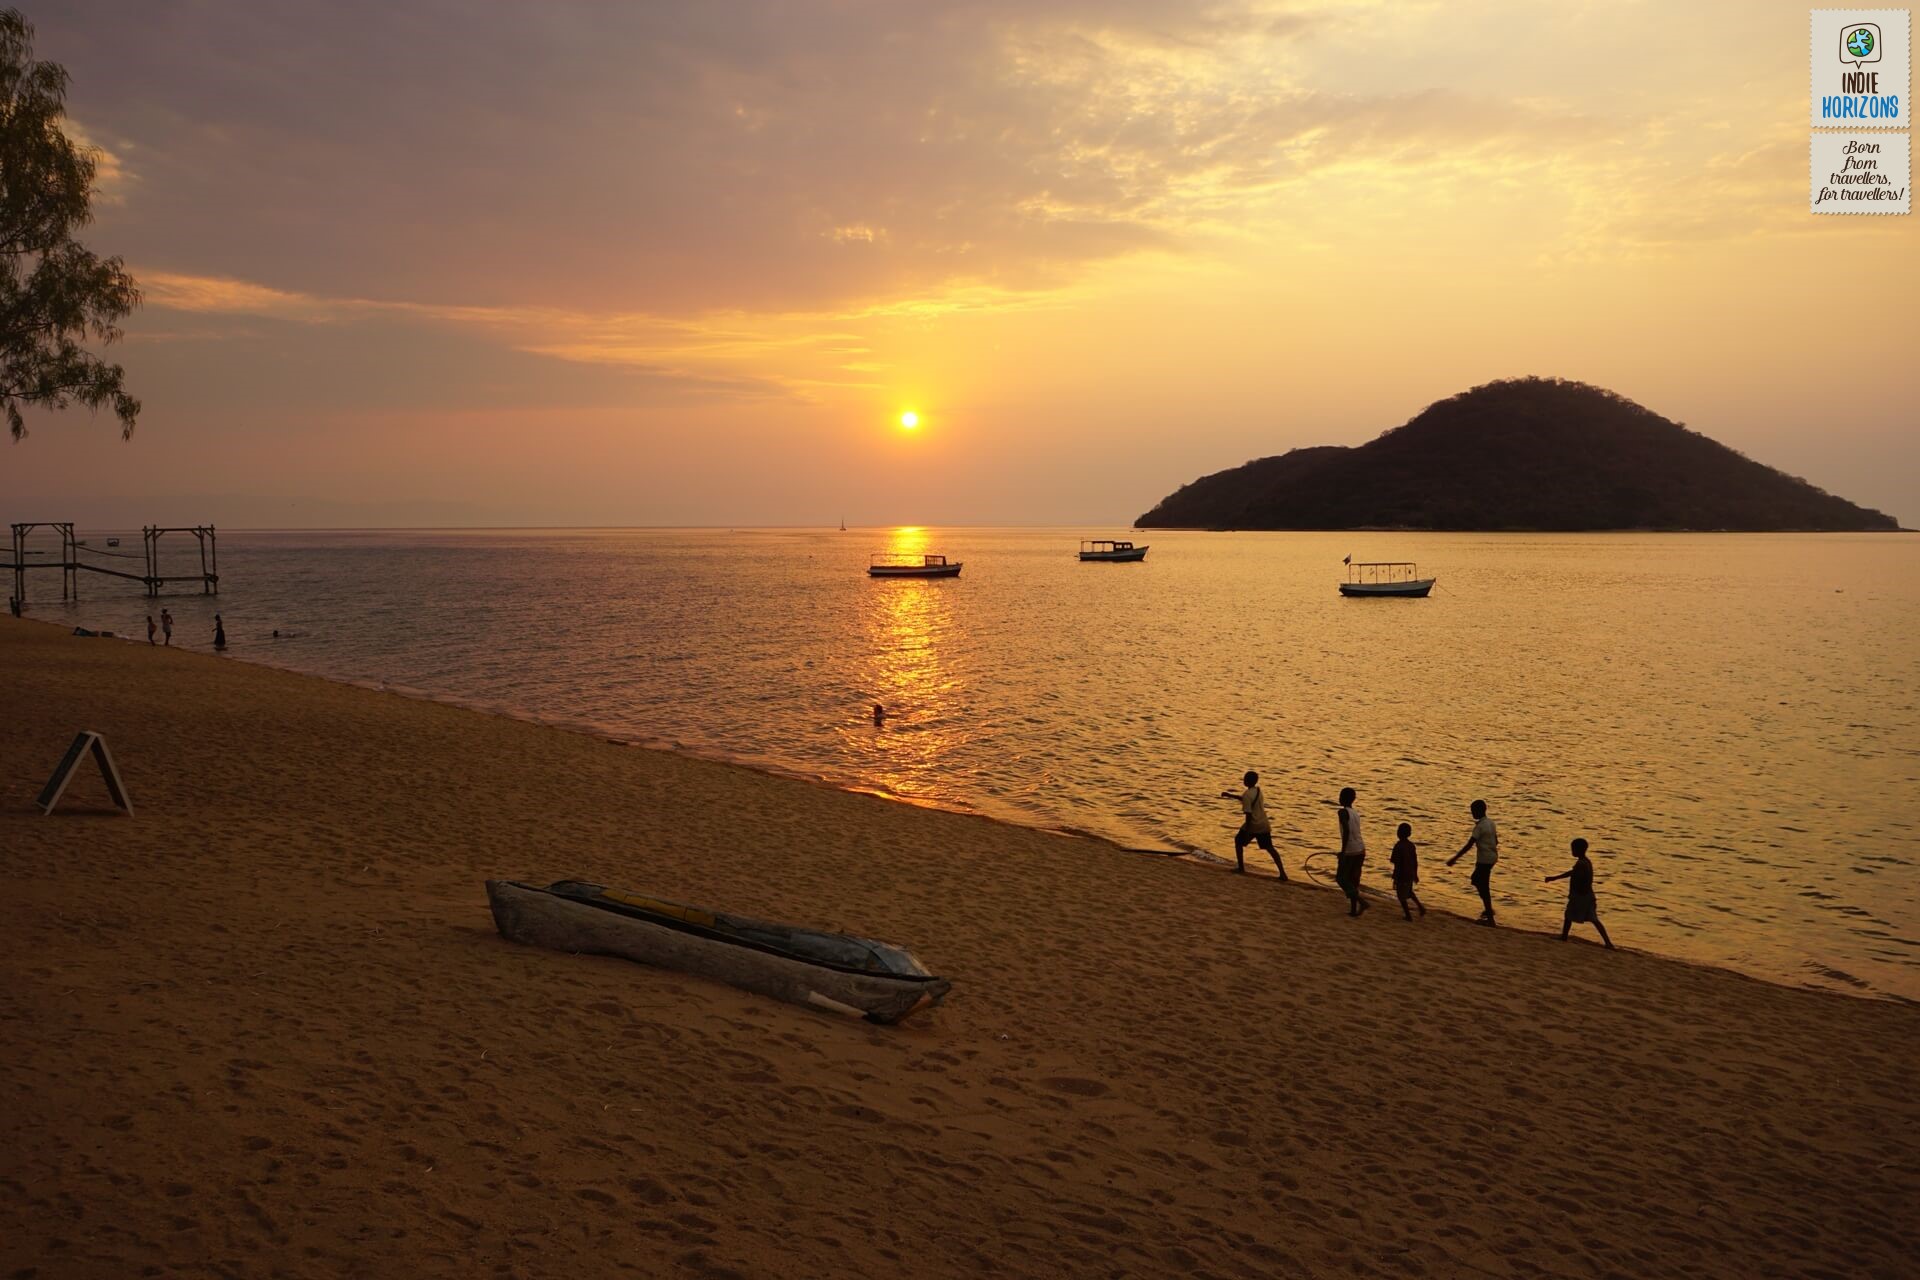 #54. Malawi, sunset at Cape Maclear.